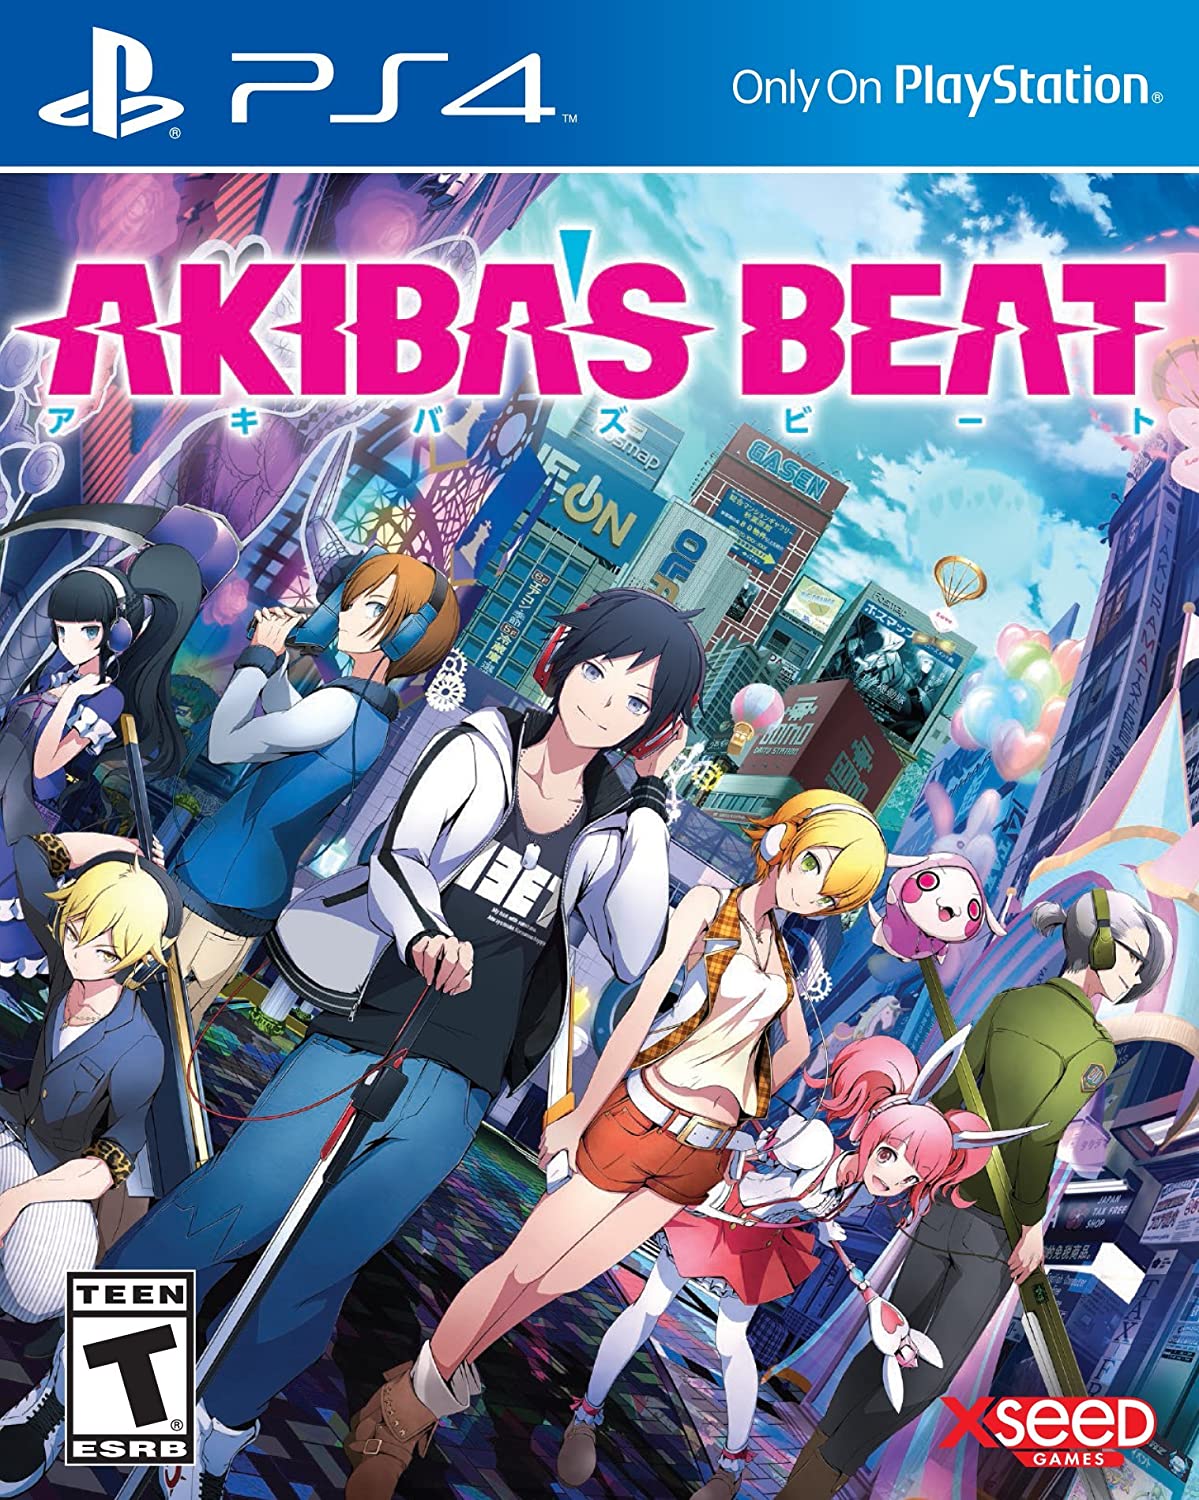 Akiba’s Beat player count stats